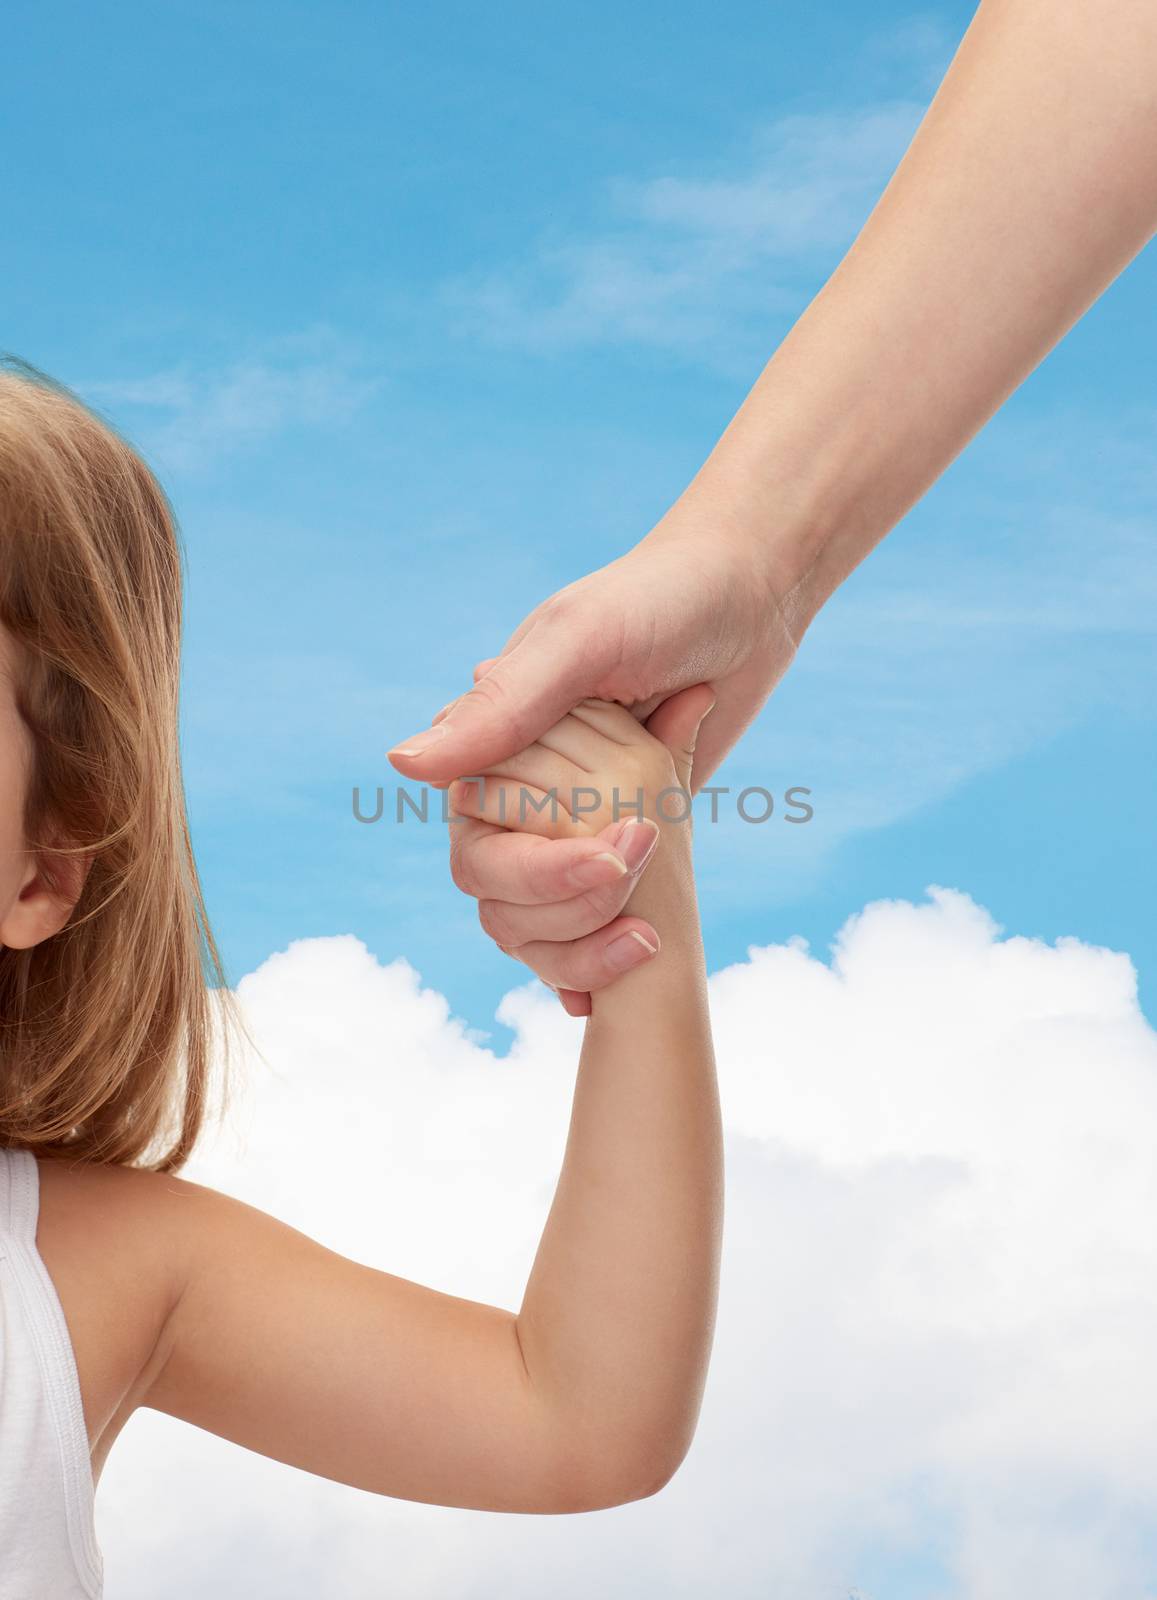 people, charity, family and adoption concept - close up of woman and little girl holding hands over blue sky and cloud background